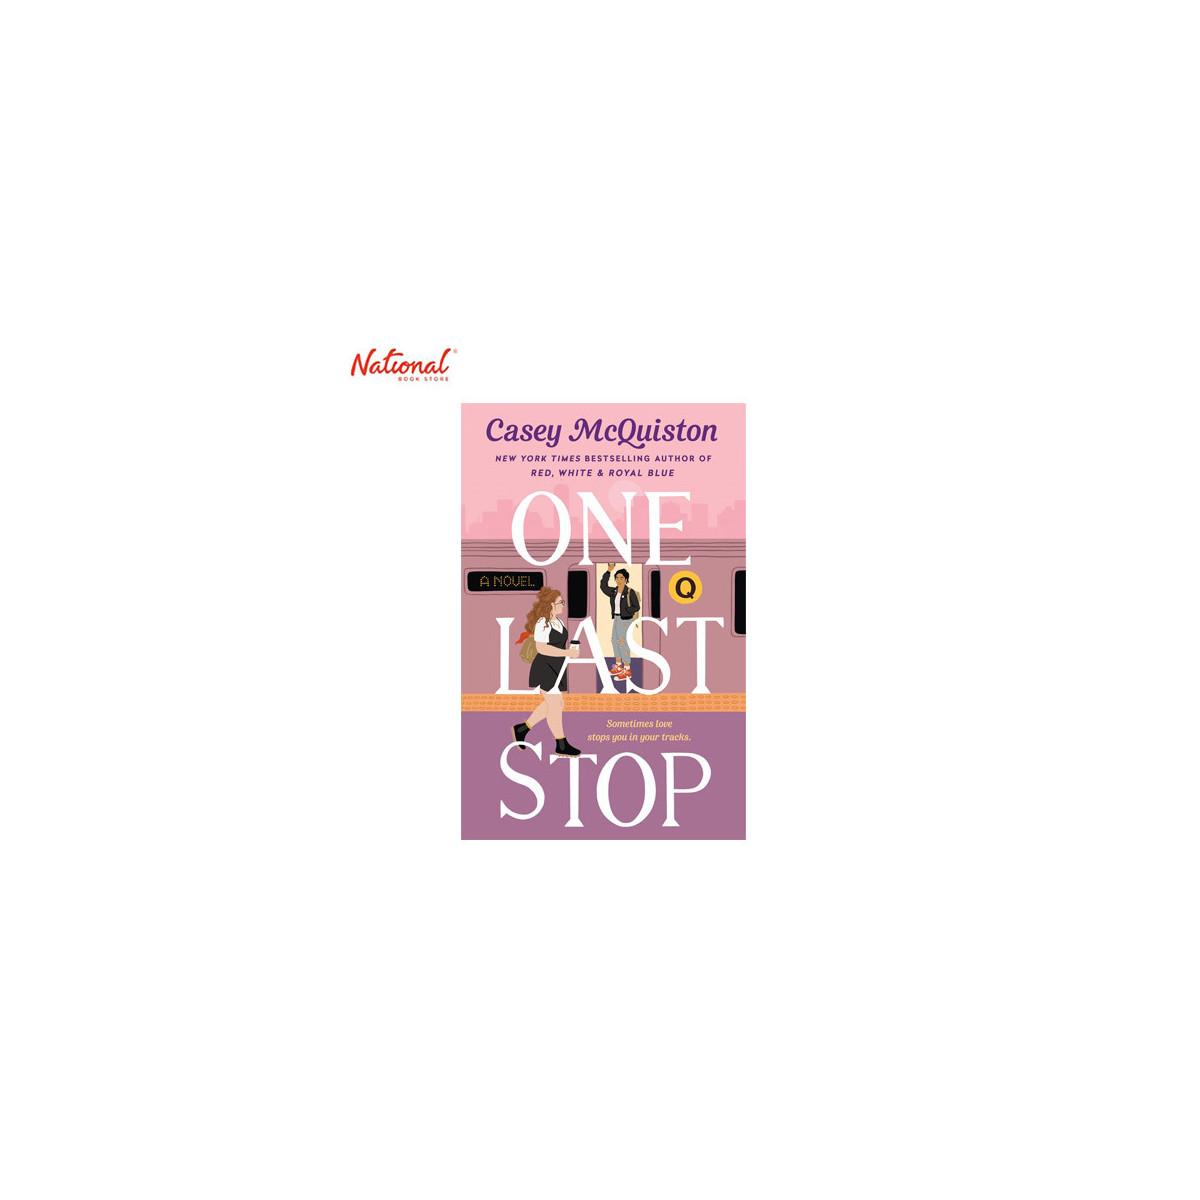 One Last Stop Trade Paperback by Casey McQuiston